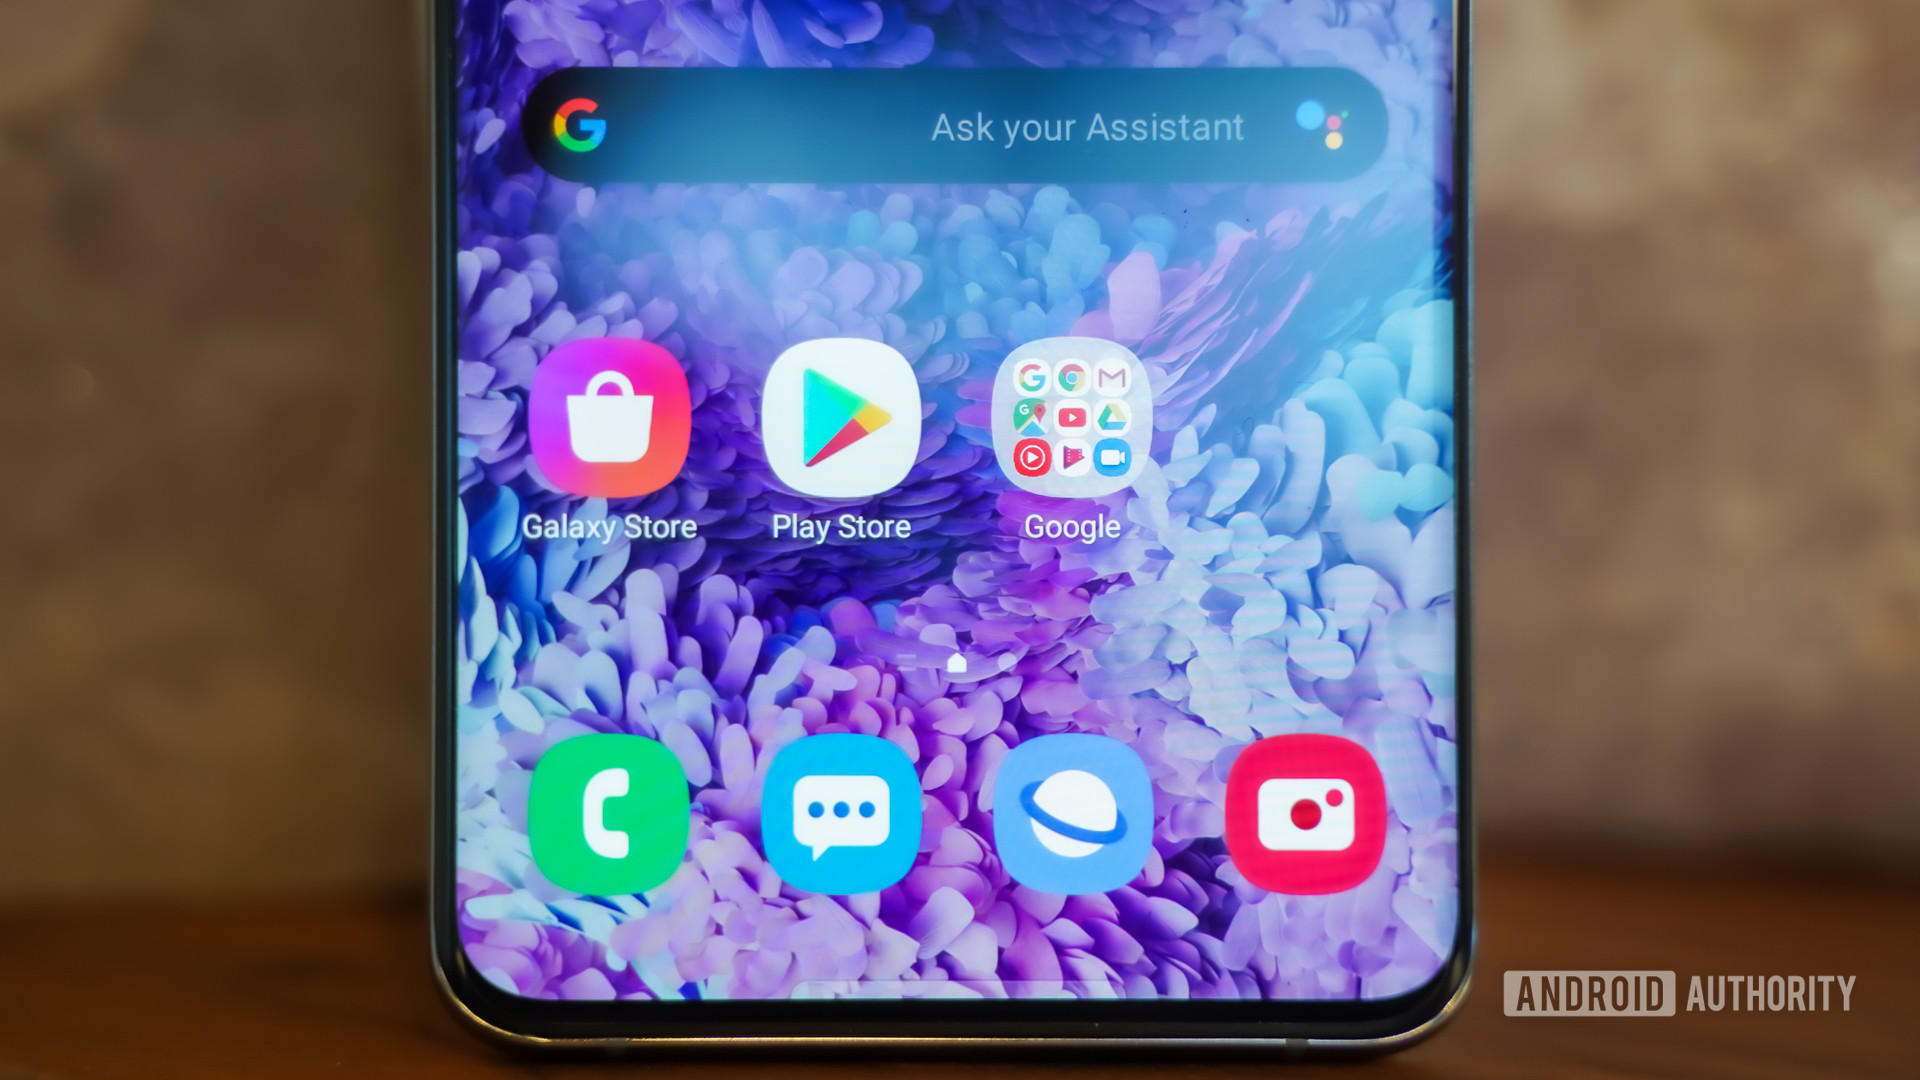 Samsung Galaxy S20 Ultra Android 10 One UI 2